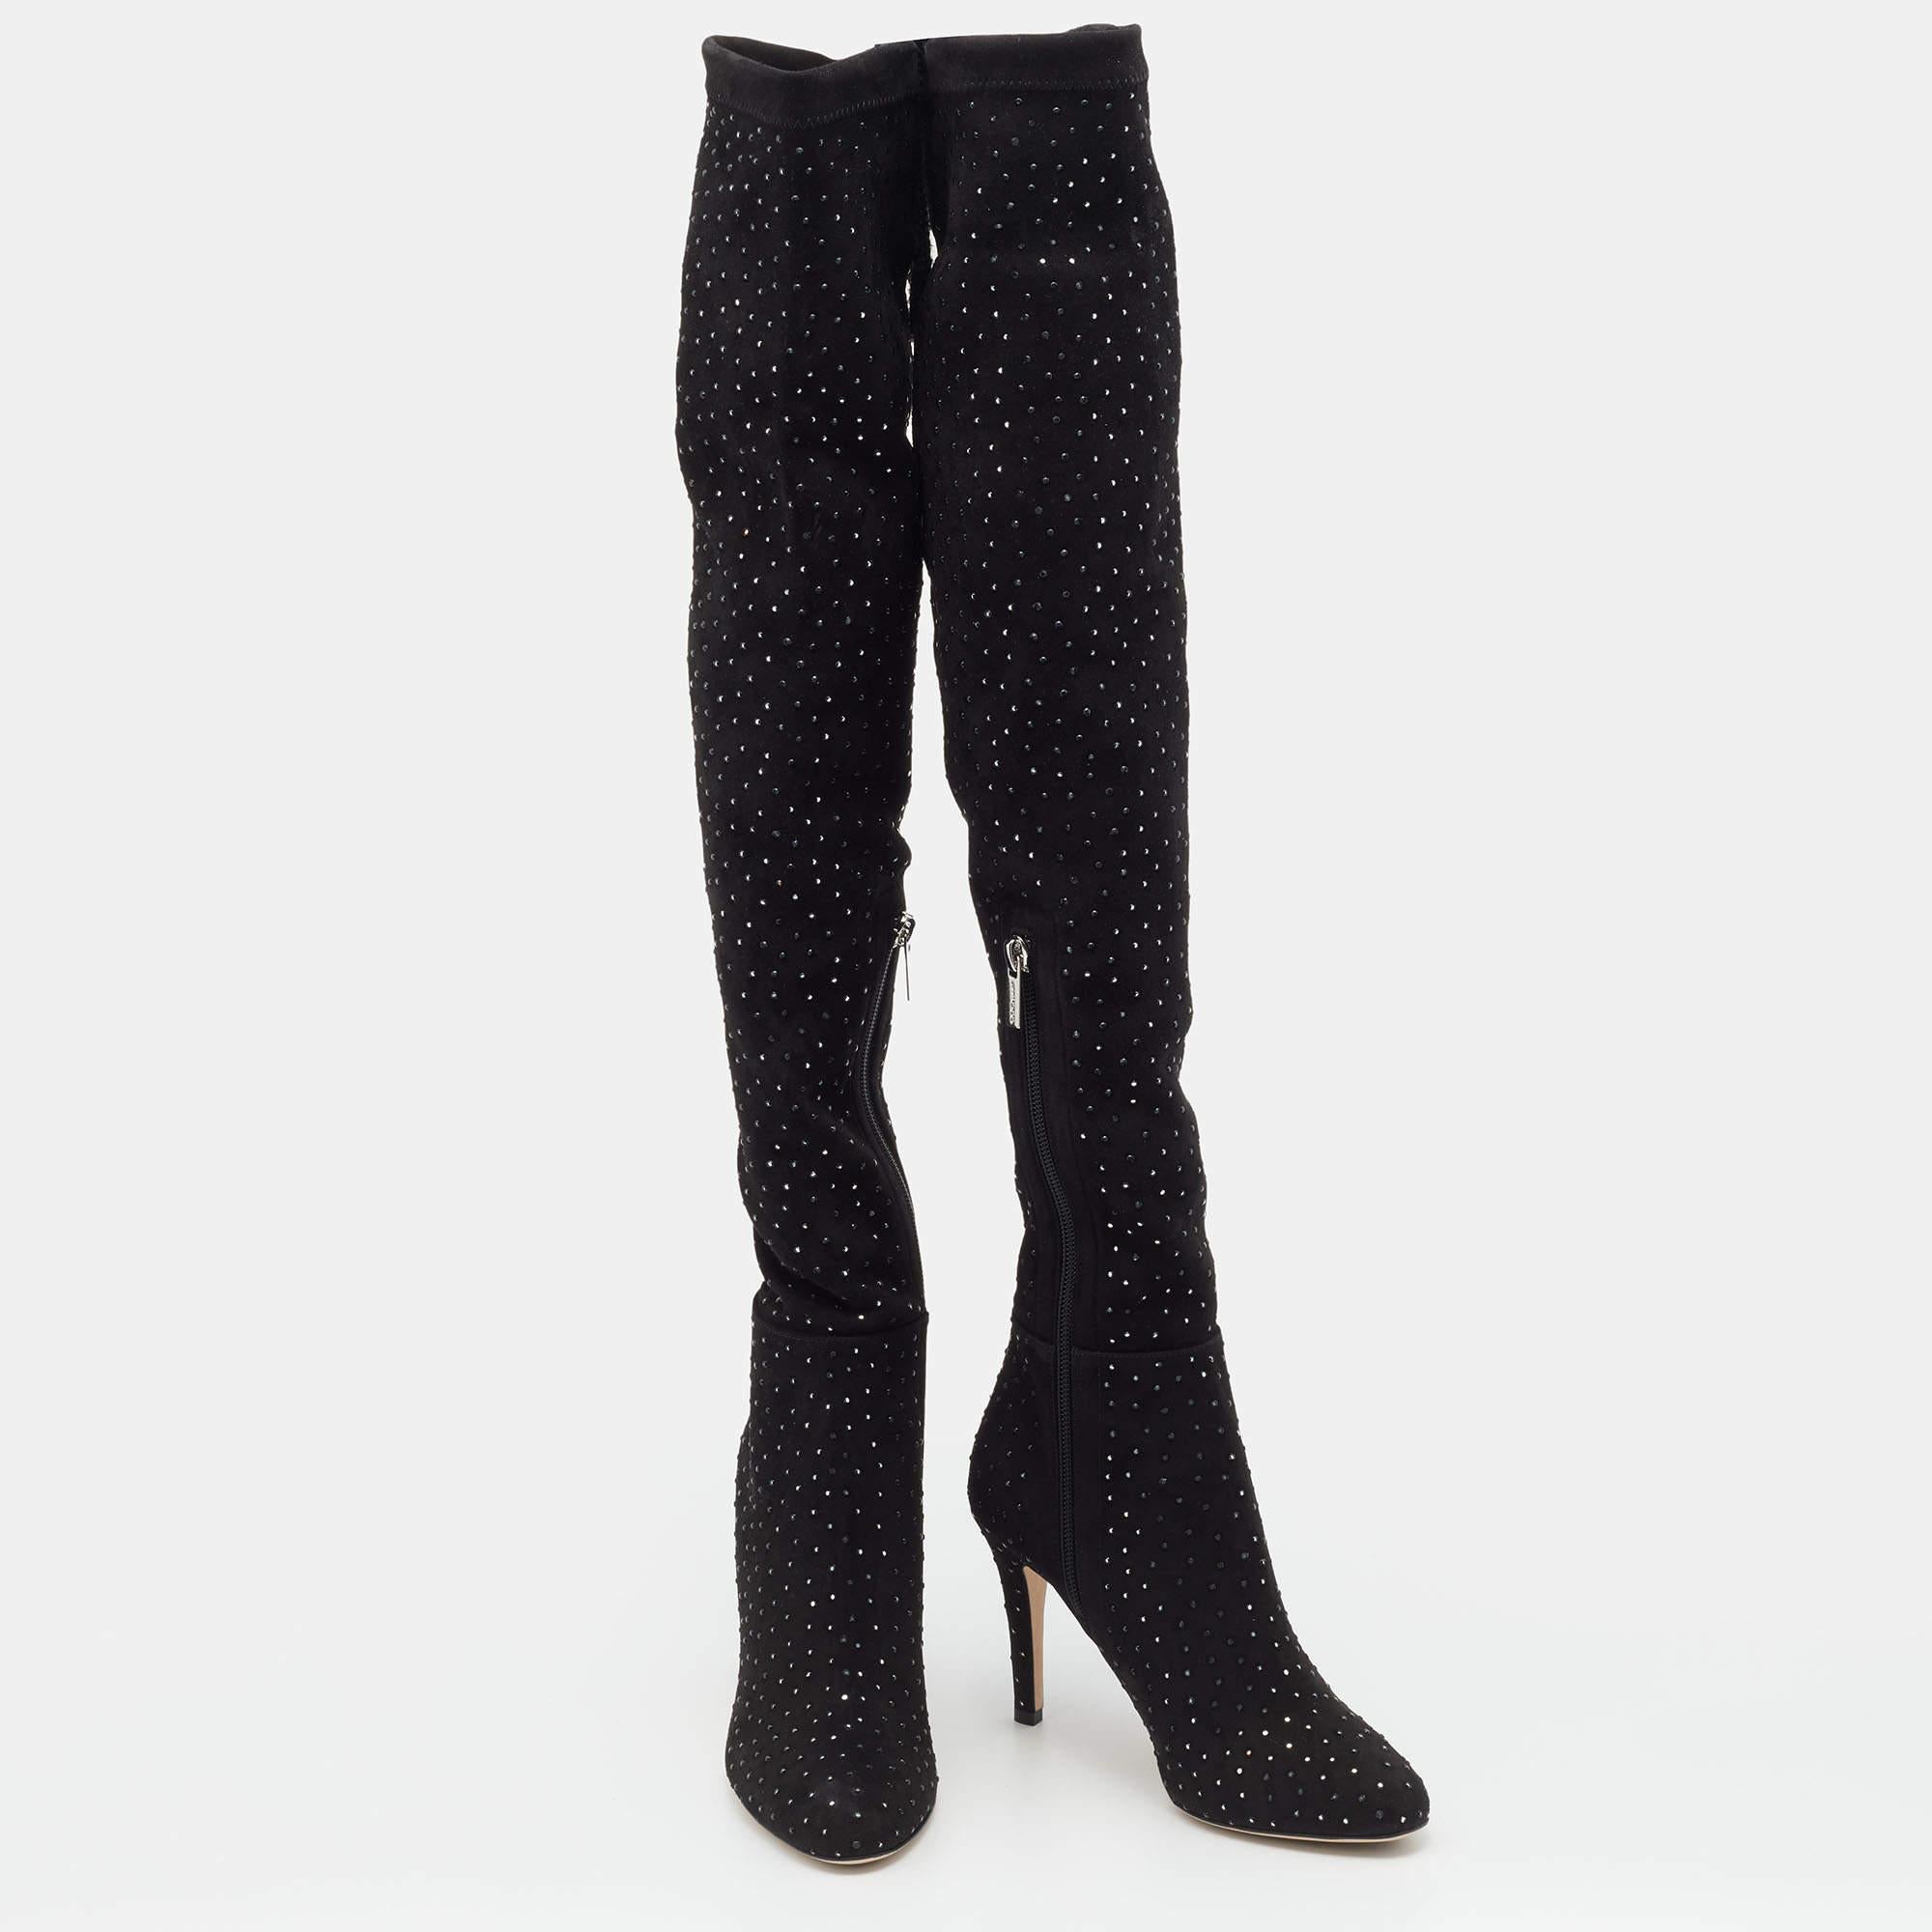 Jimmy Choo brings you this fabulous pair of thigh-high boots that will give you confidence and loads of style. The shoes have been crafted from stretch fabric in a classy black shade and styled with embellishments and 9 cm heels.


Includes
Original